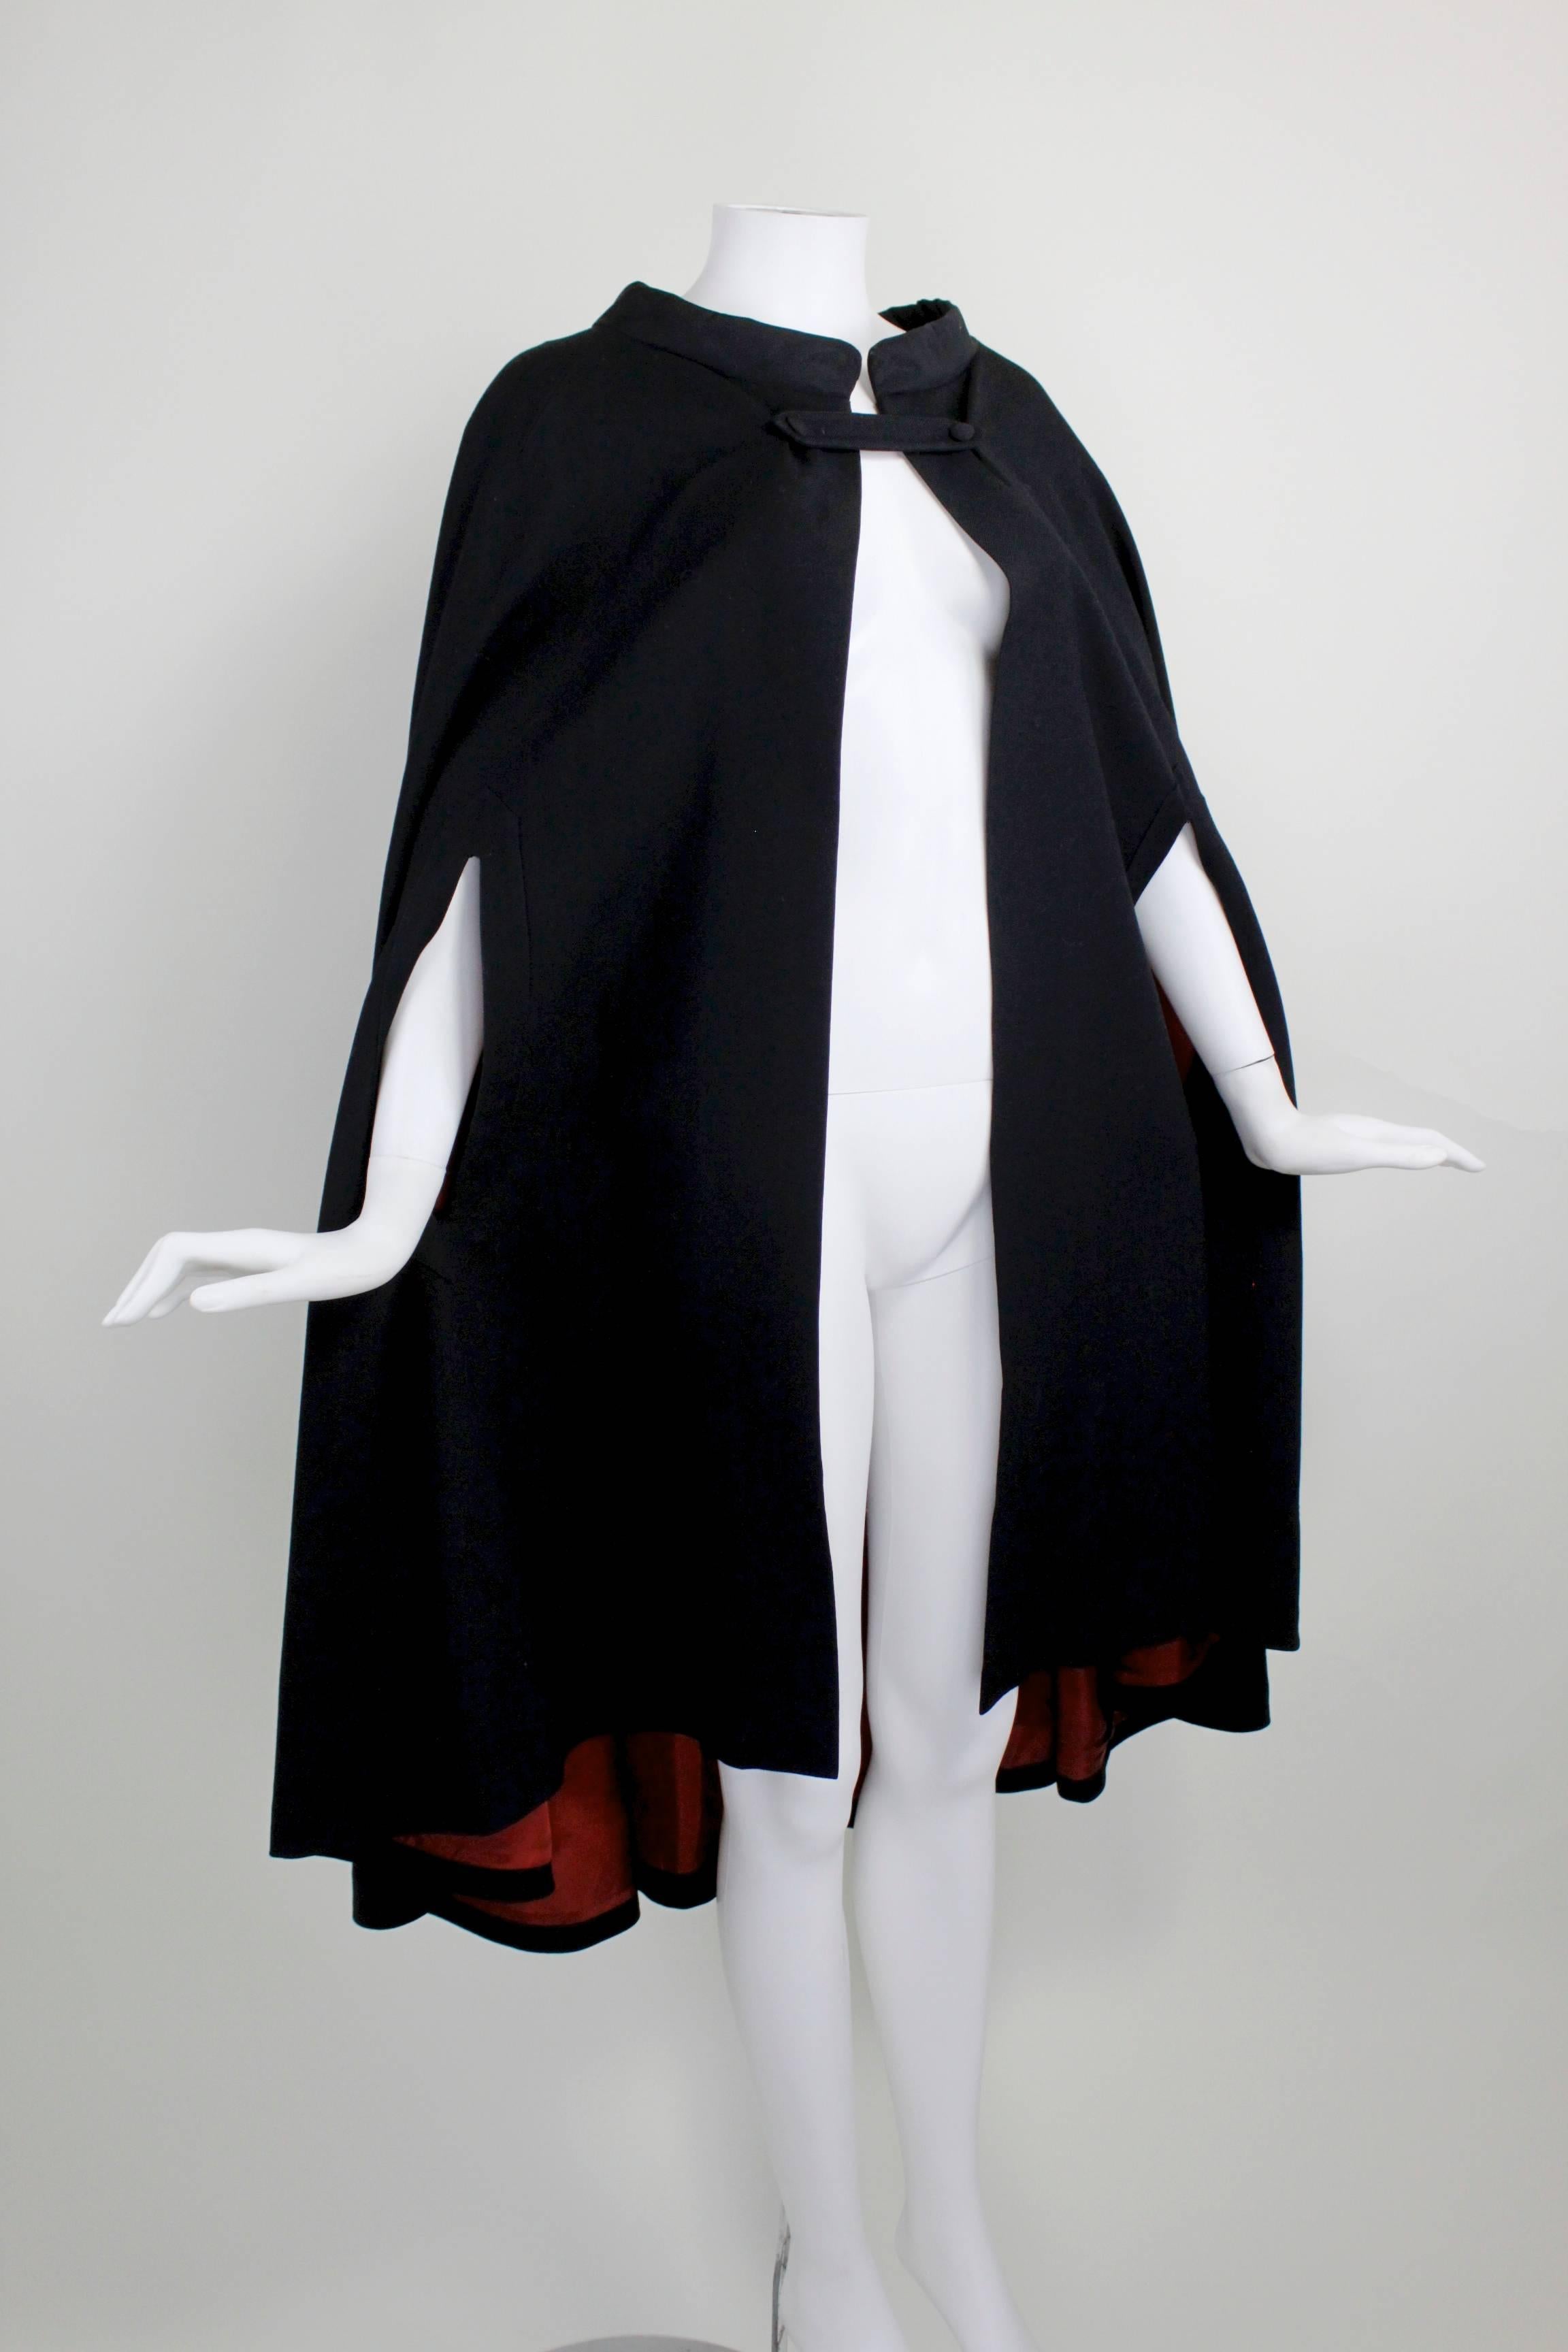 Women's 1960s Pierre Cardin Iconic Black Wool Cape with Silk Lining For Sale